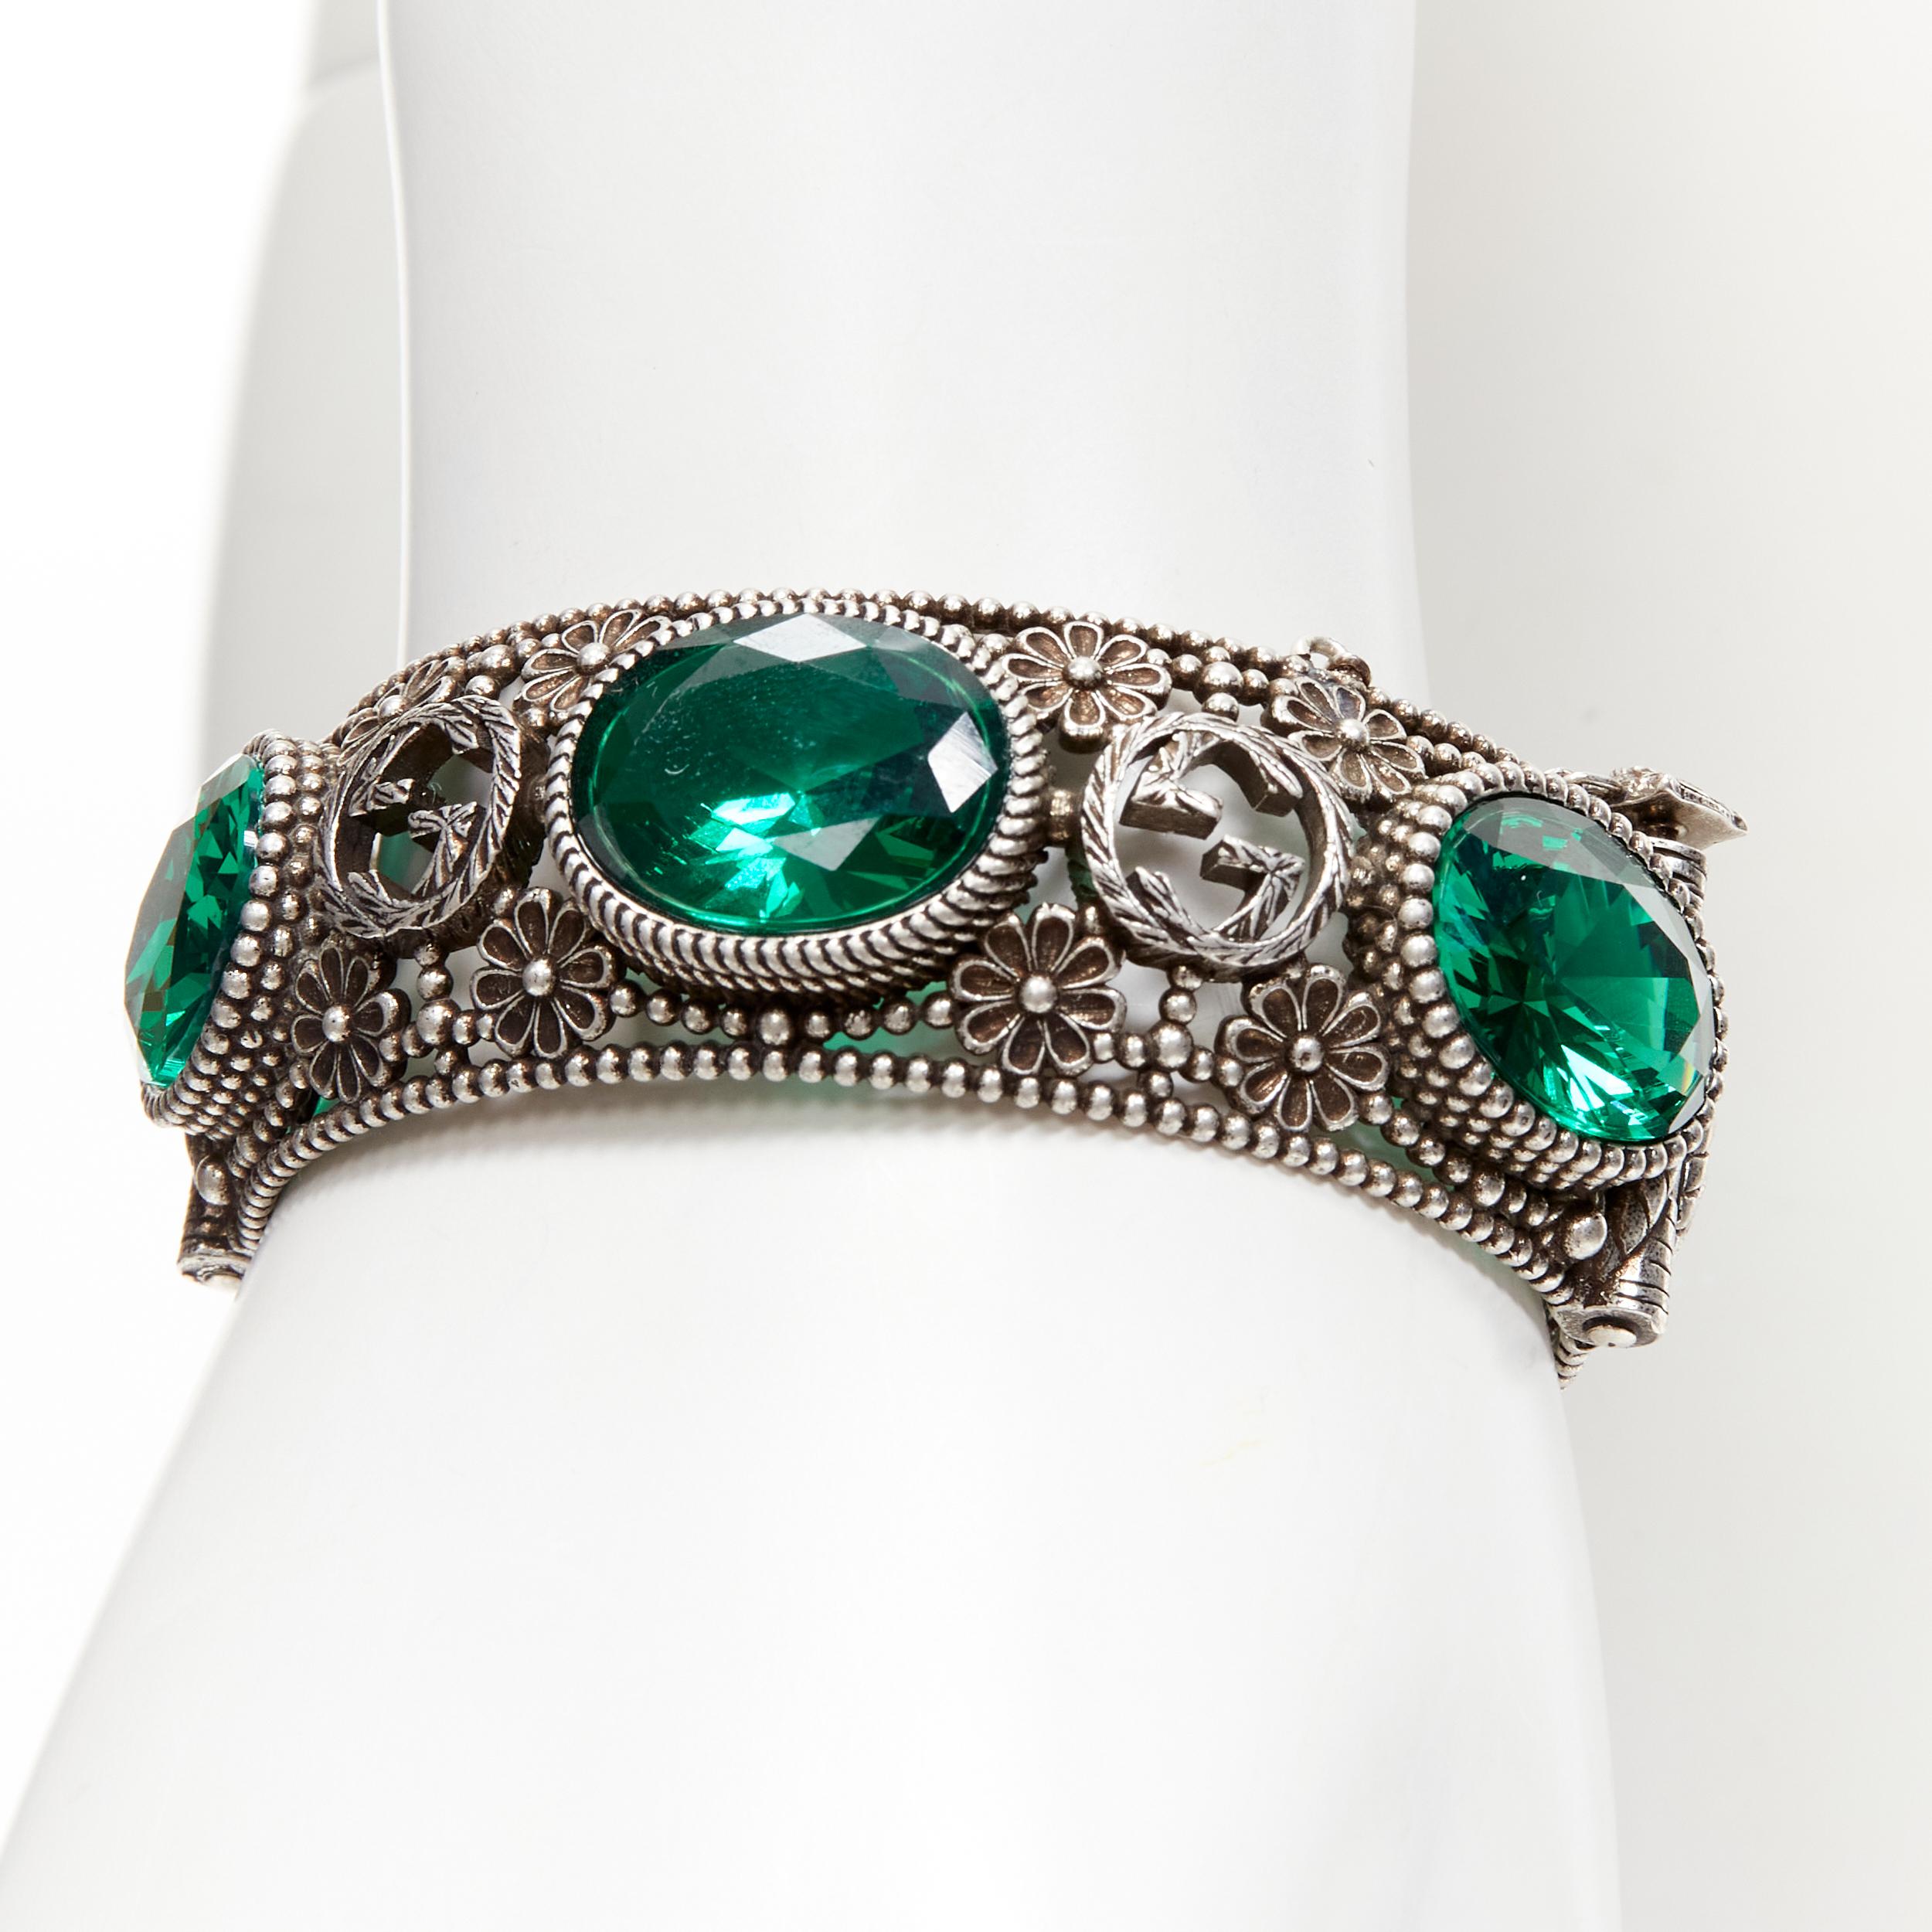 new GUCCI Alessandro Michele GG logo green crystal antique silver bangle
Reference: TGAS/C01652
Brand: Gucci
Designer: Alessandro Michele
Model: 53791j8845 8133
Material: Metal
Color: Green, Silver
Pattern: Crystals
Extra Details: GG logo